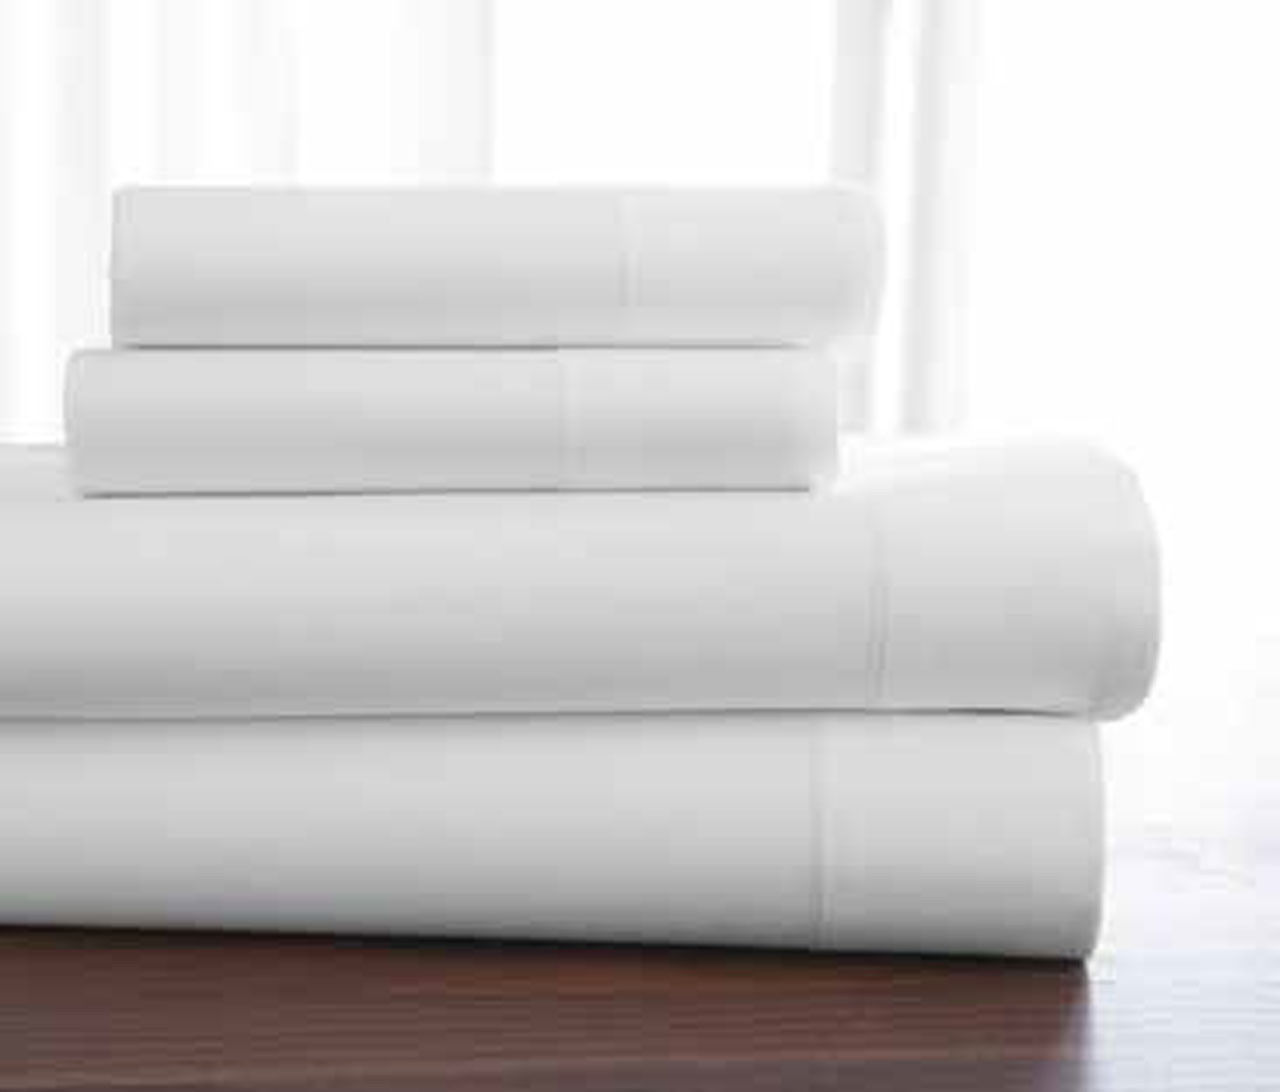 What exactly are Welspun T-400 Premium Hygrocotton Sheets?